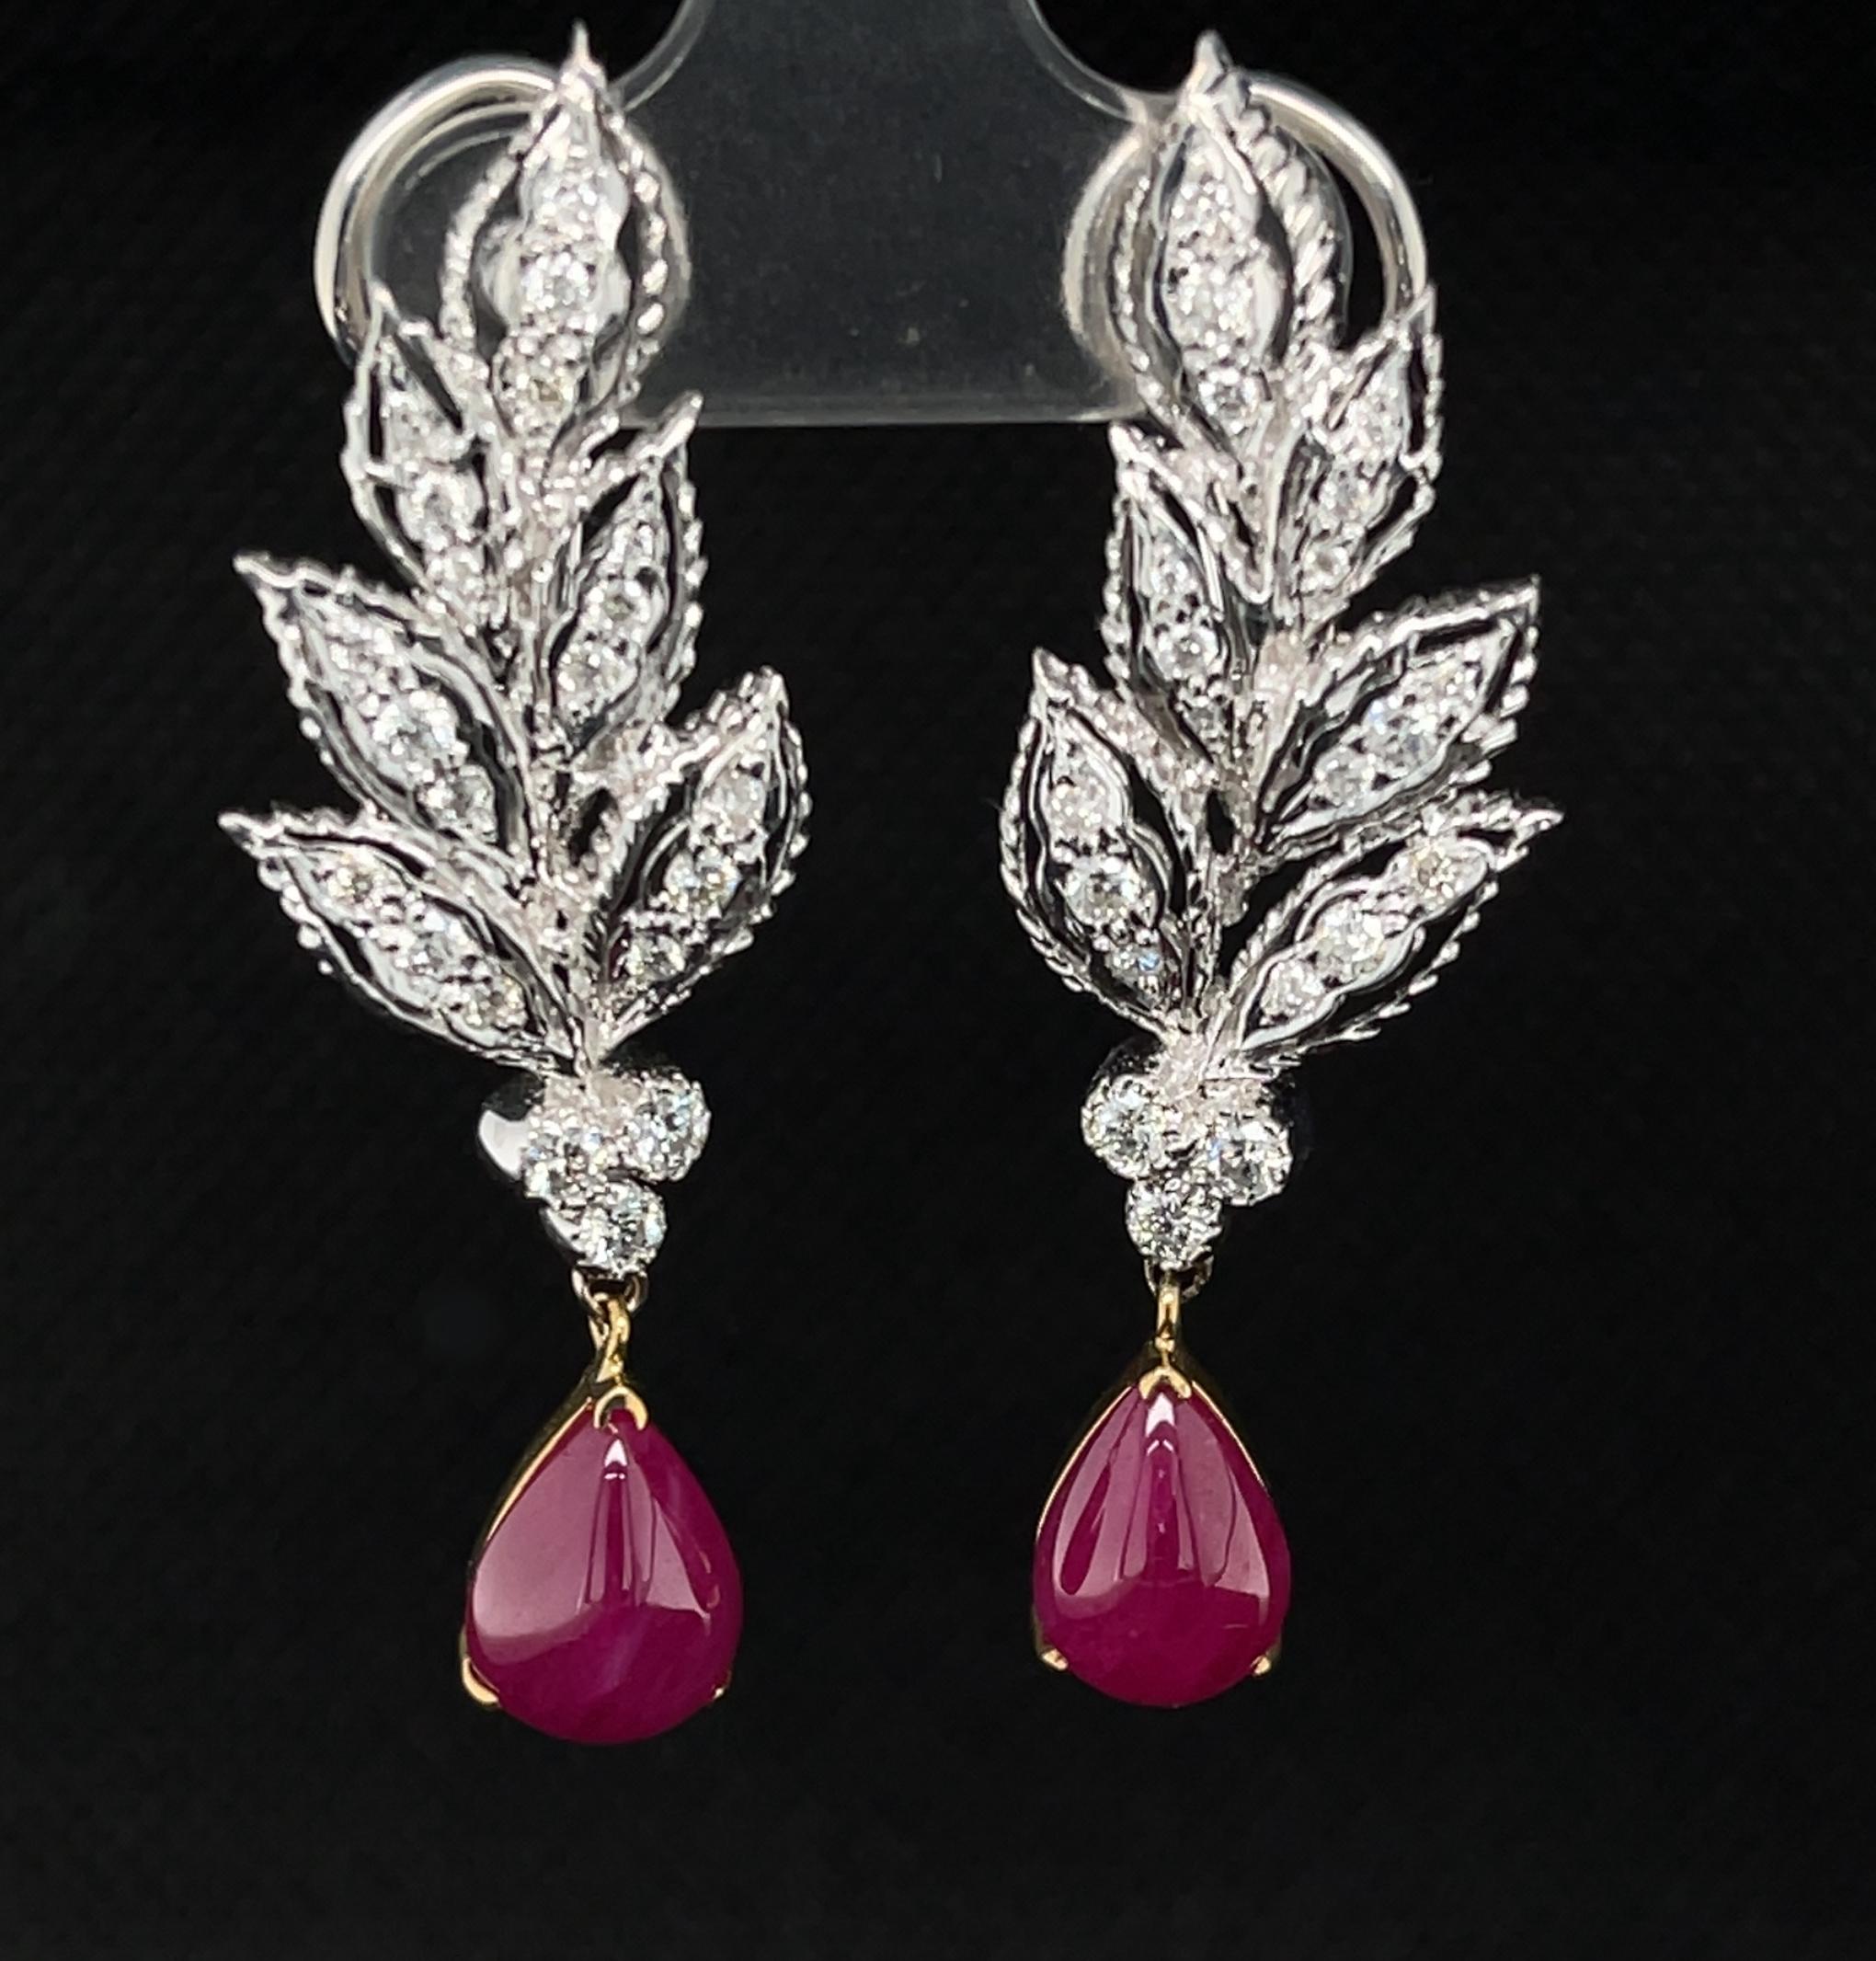 These earrings will make you feel like royalty dripping in fine rubies and diamonds! Two pear-shaped pinkish-red ruby cabochons from Burma are suspended from ornate diamond-set plumes. The plume shaped earring tops are pave-set with sparkly round